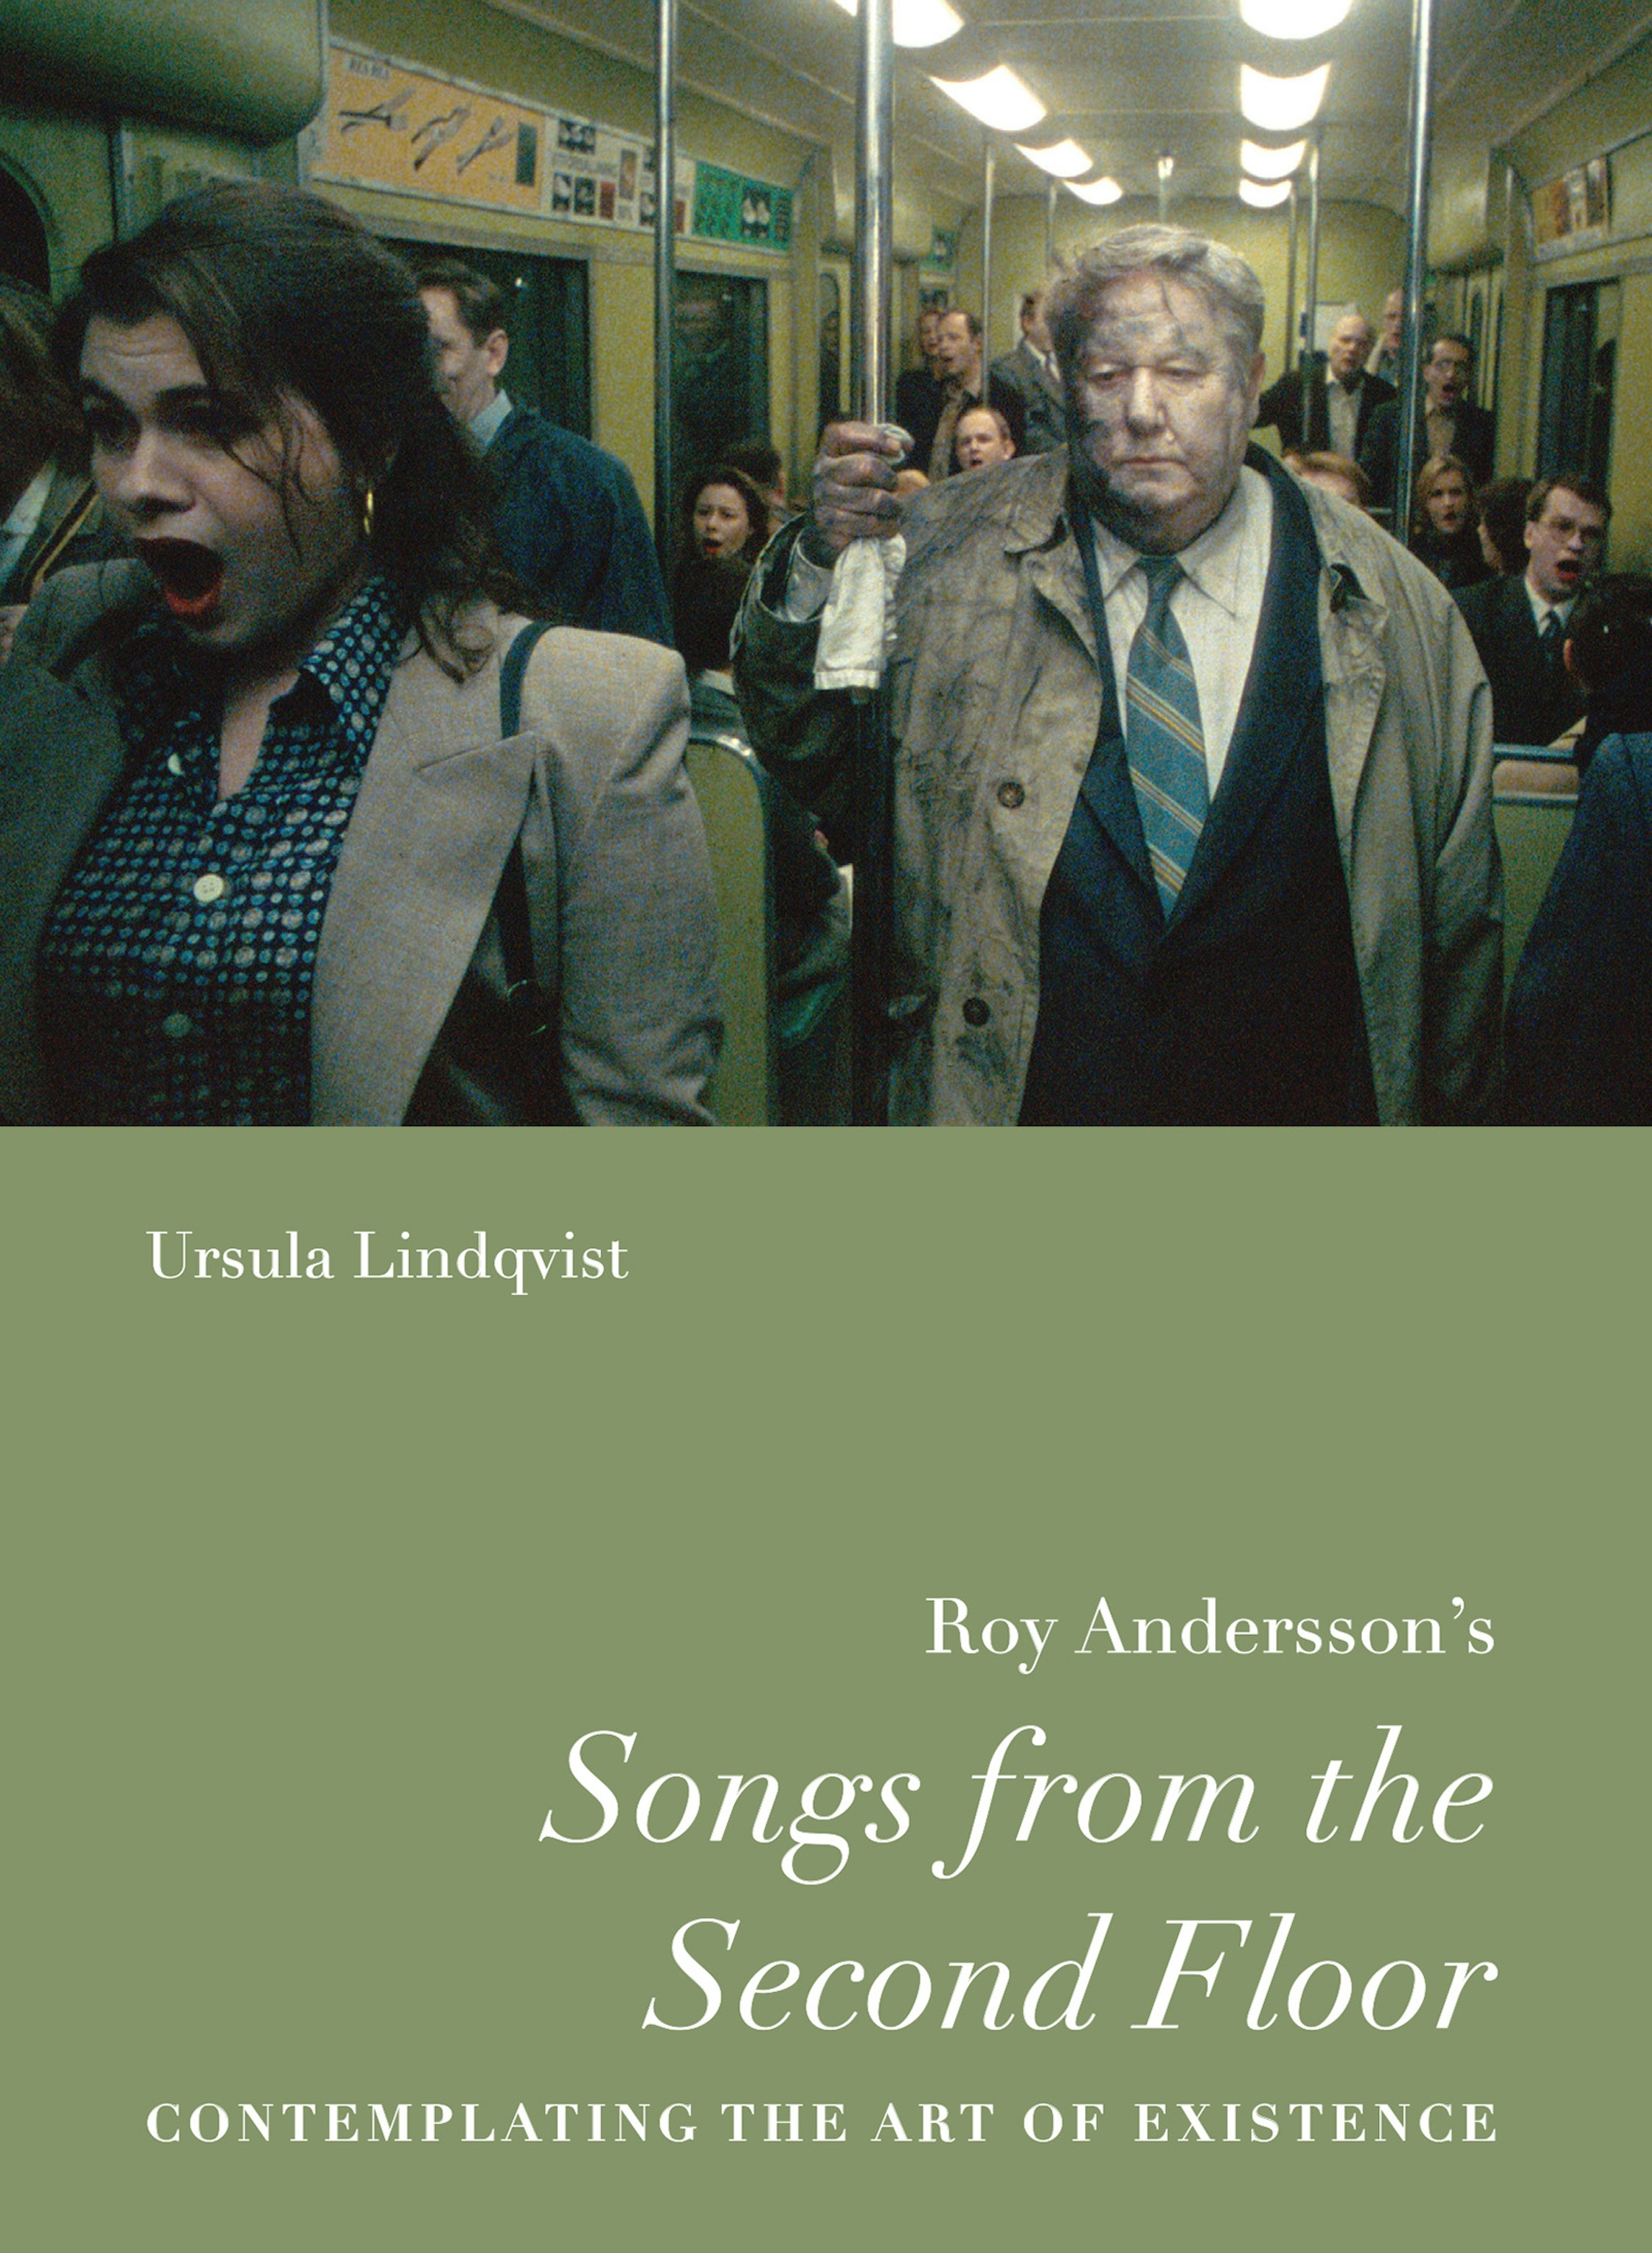 Roy Andersson’s “Songs from the Second Floor”